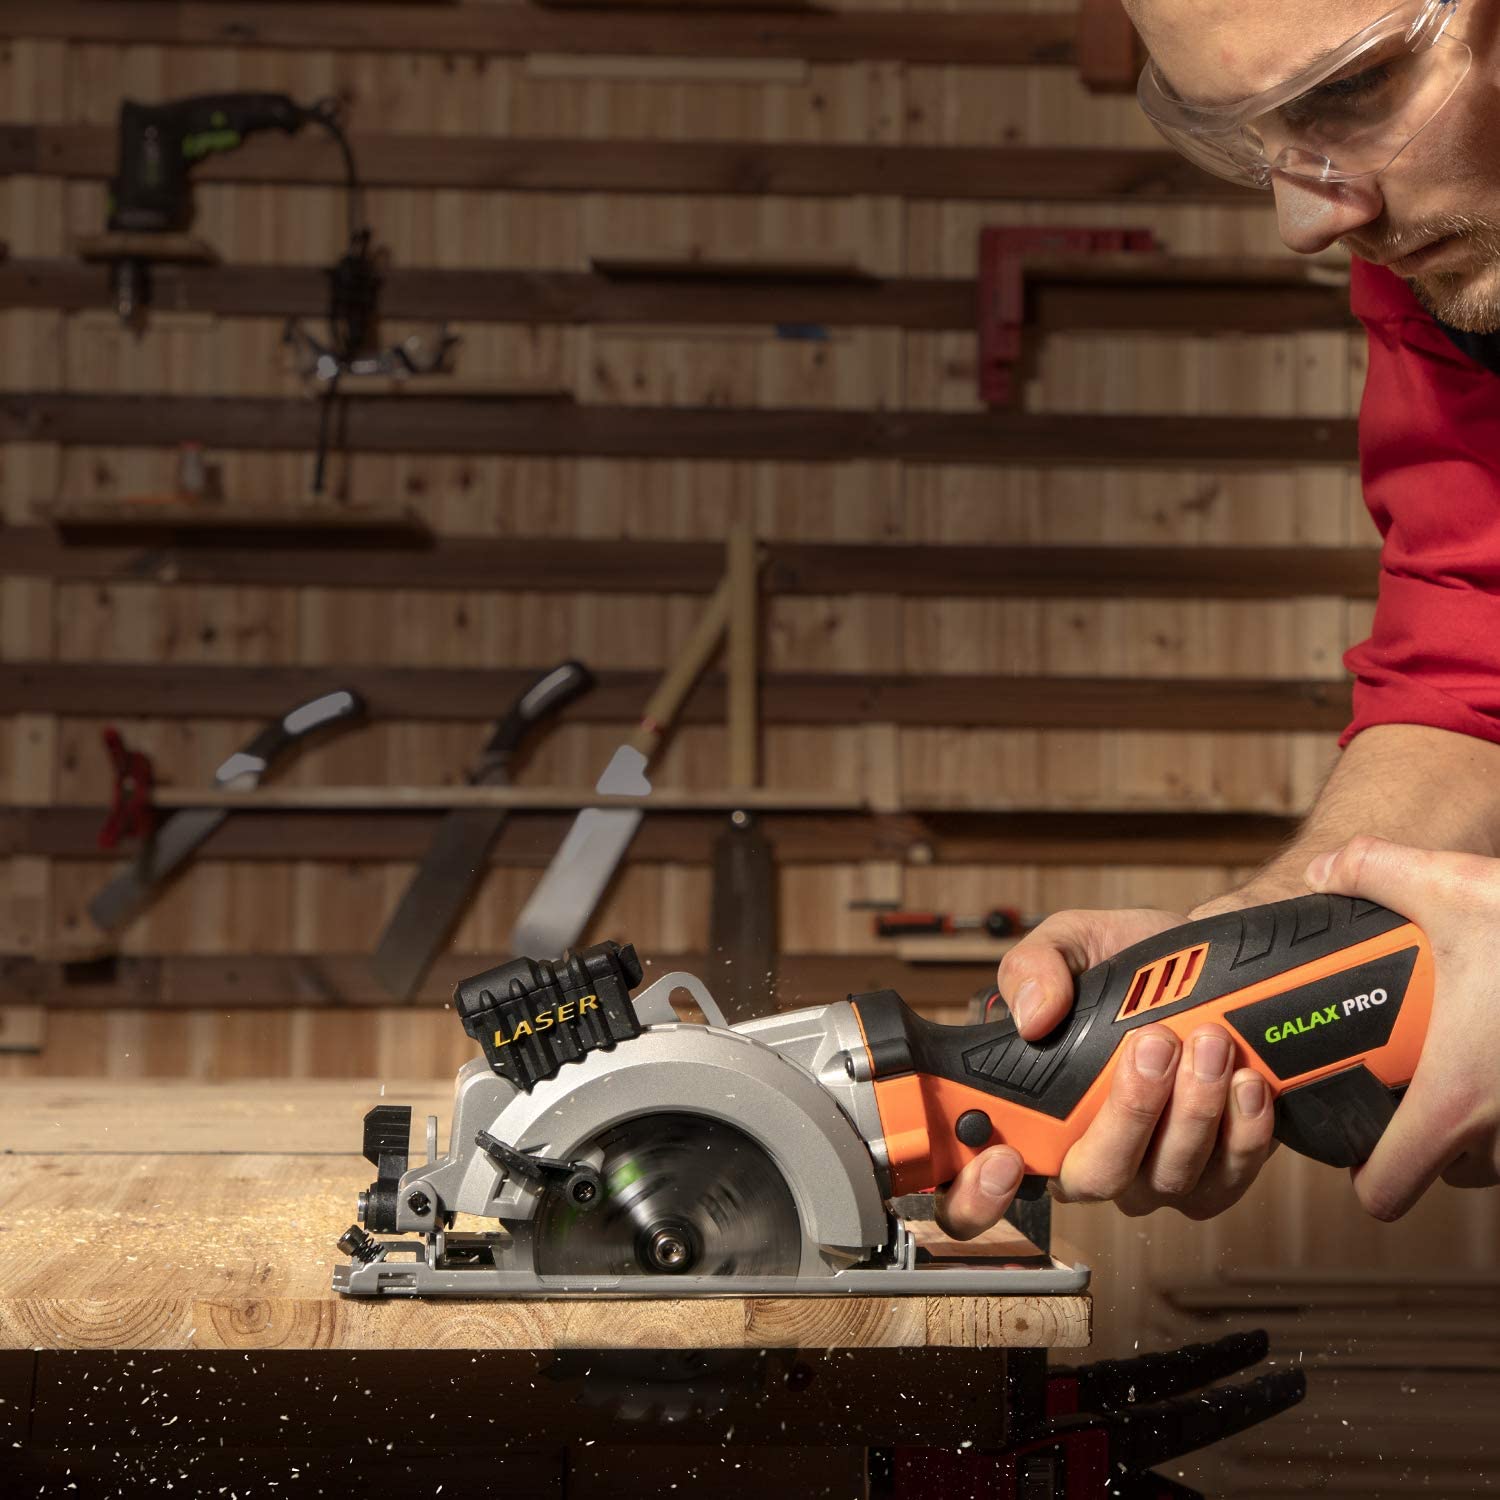 GALAX PRO Mini Circular Saw Ideal for Wood, Soft Metal, Tile and Plastic Cuts